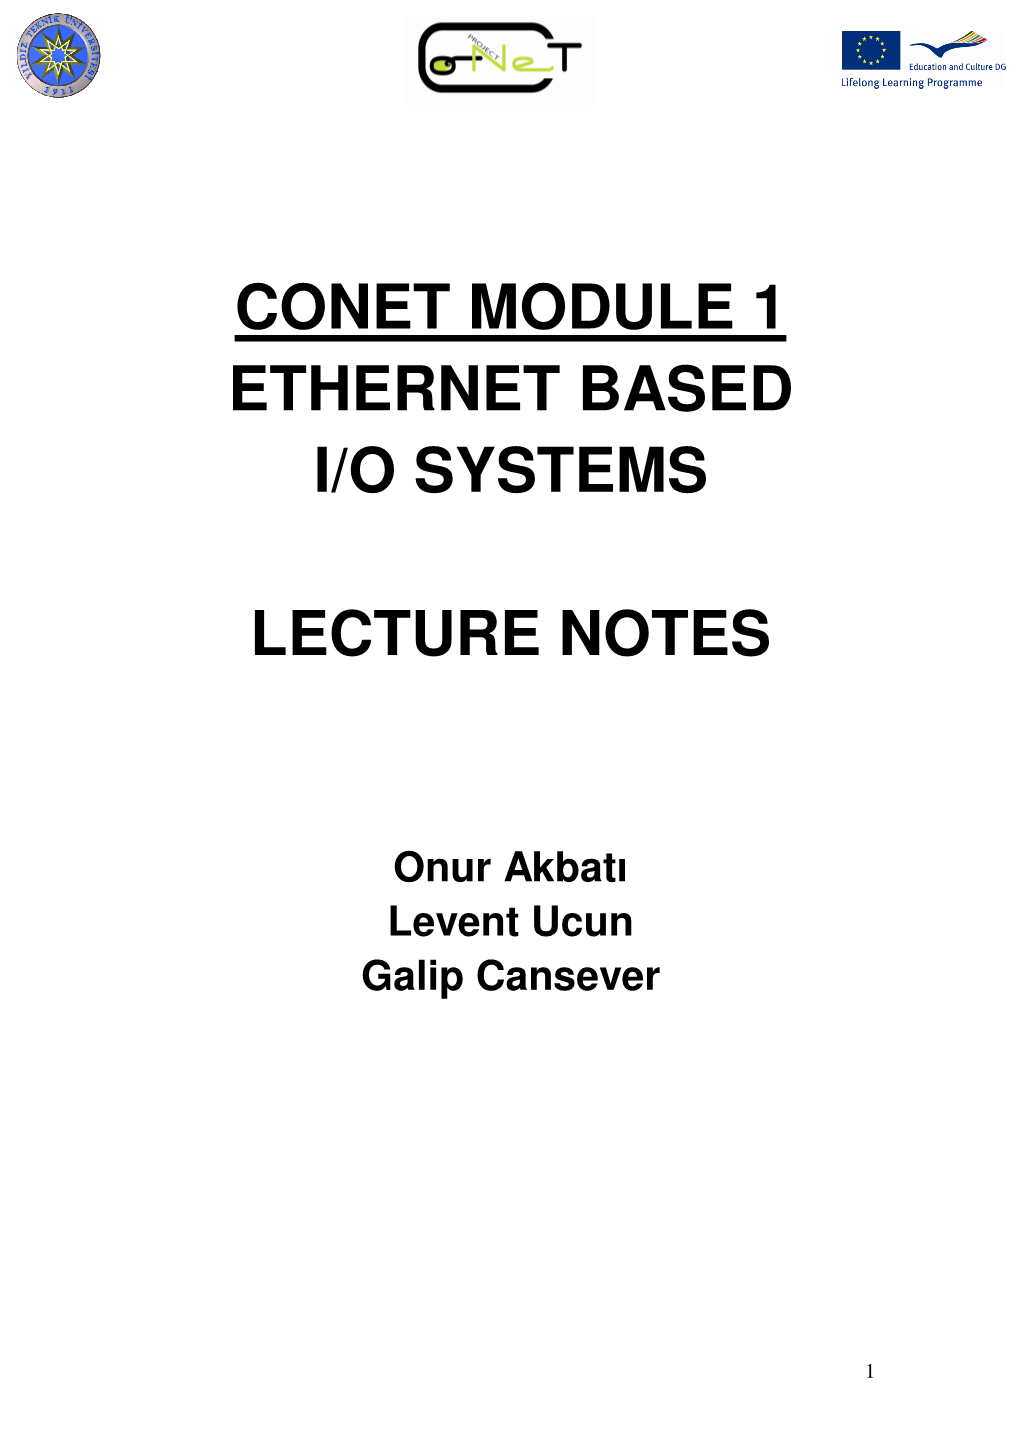 Conet Module 1 Ethernet Based I/O Systems Lecture